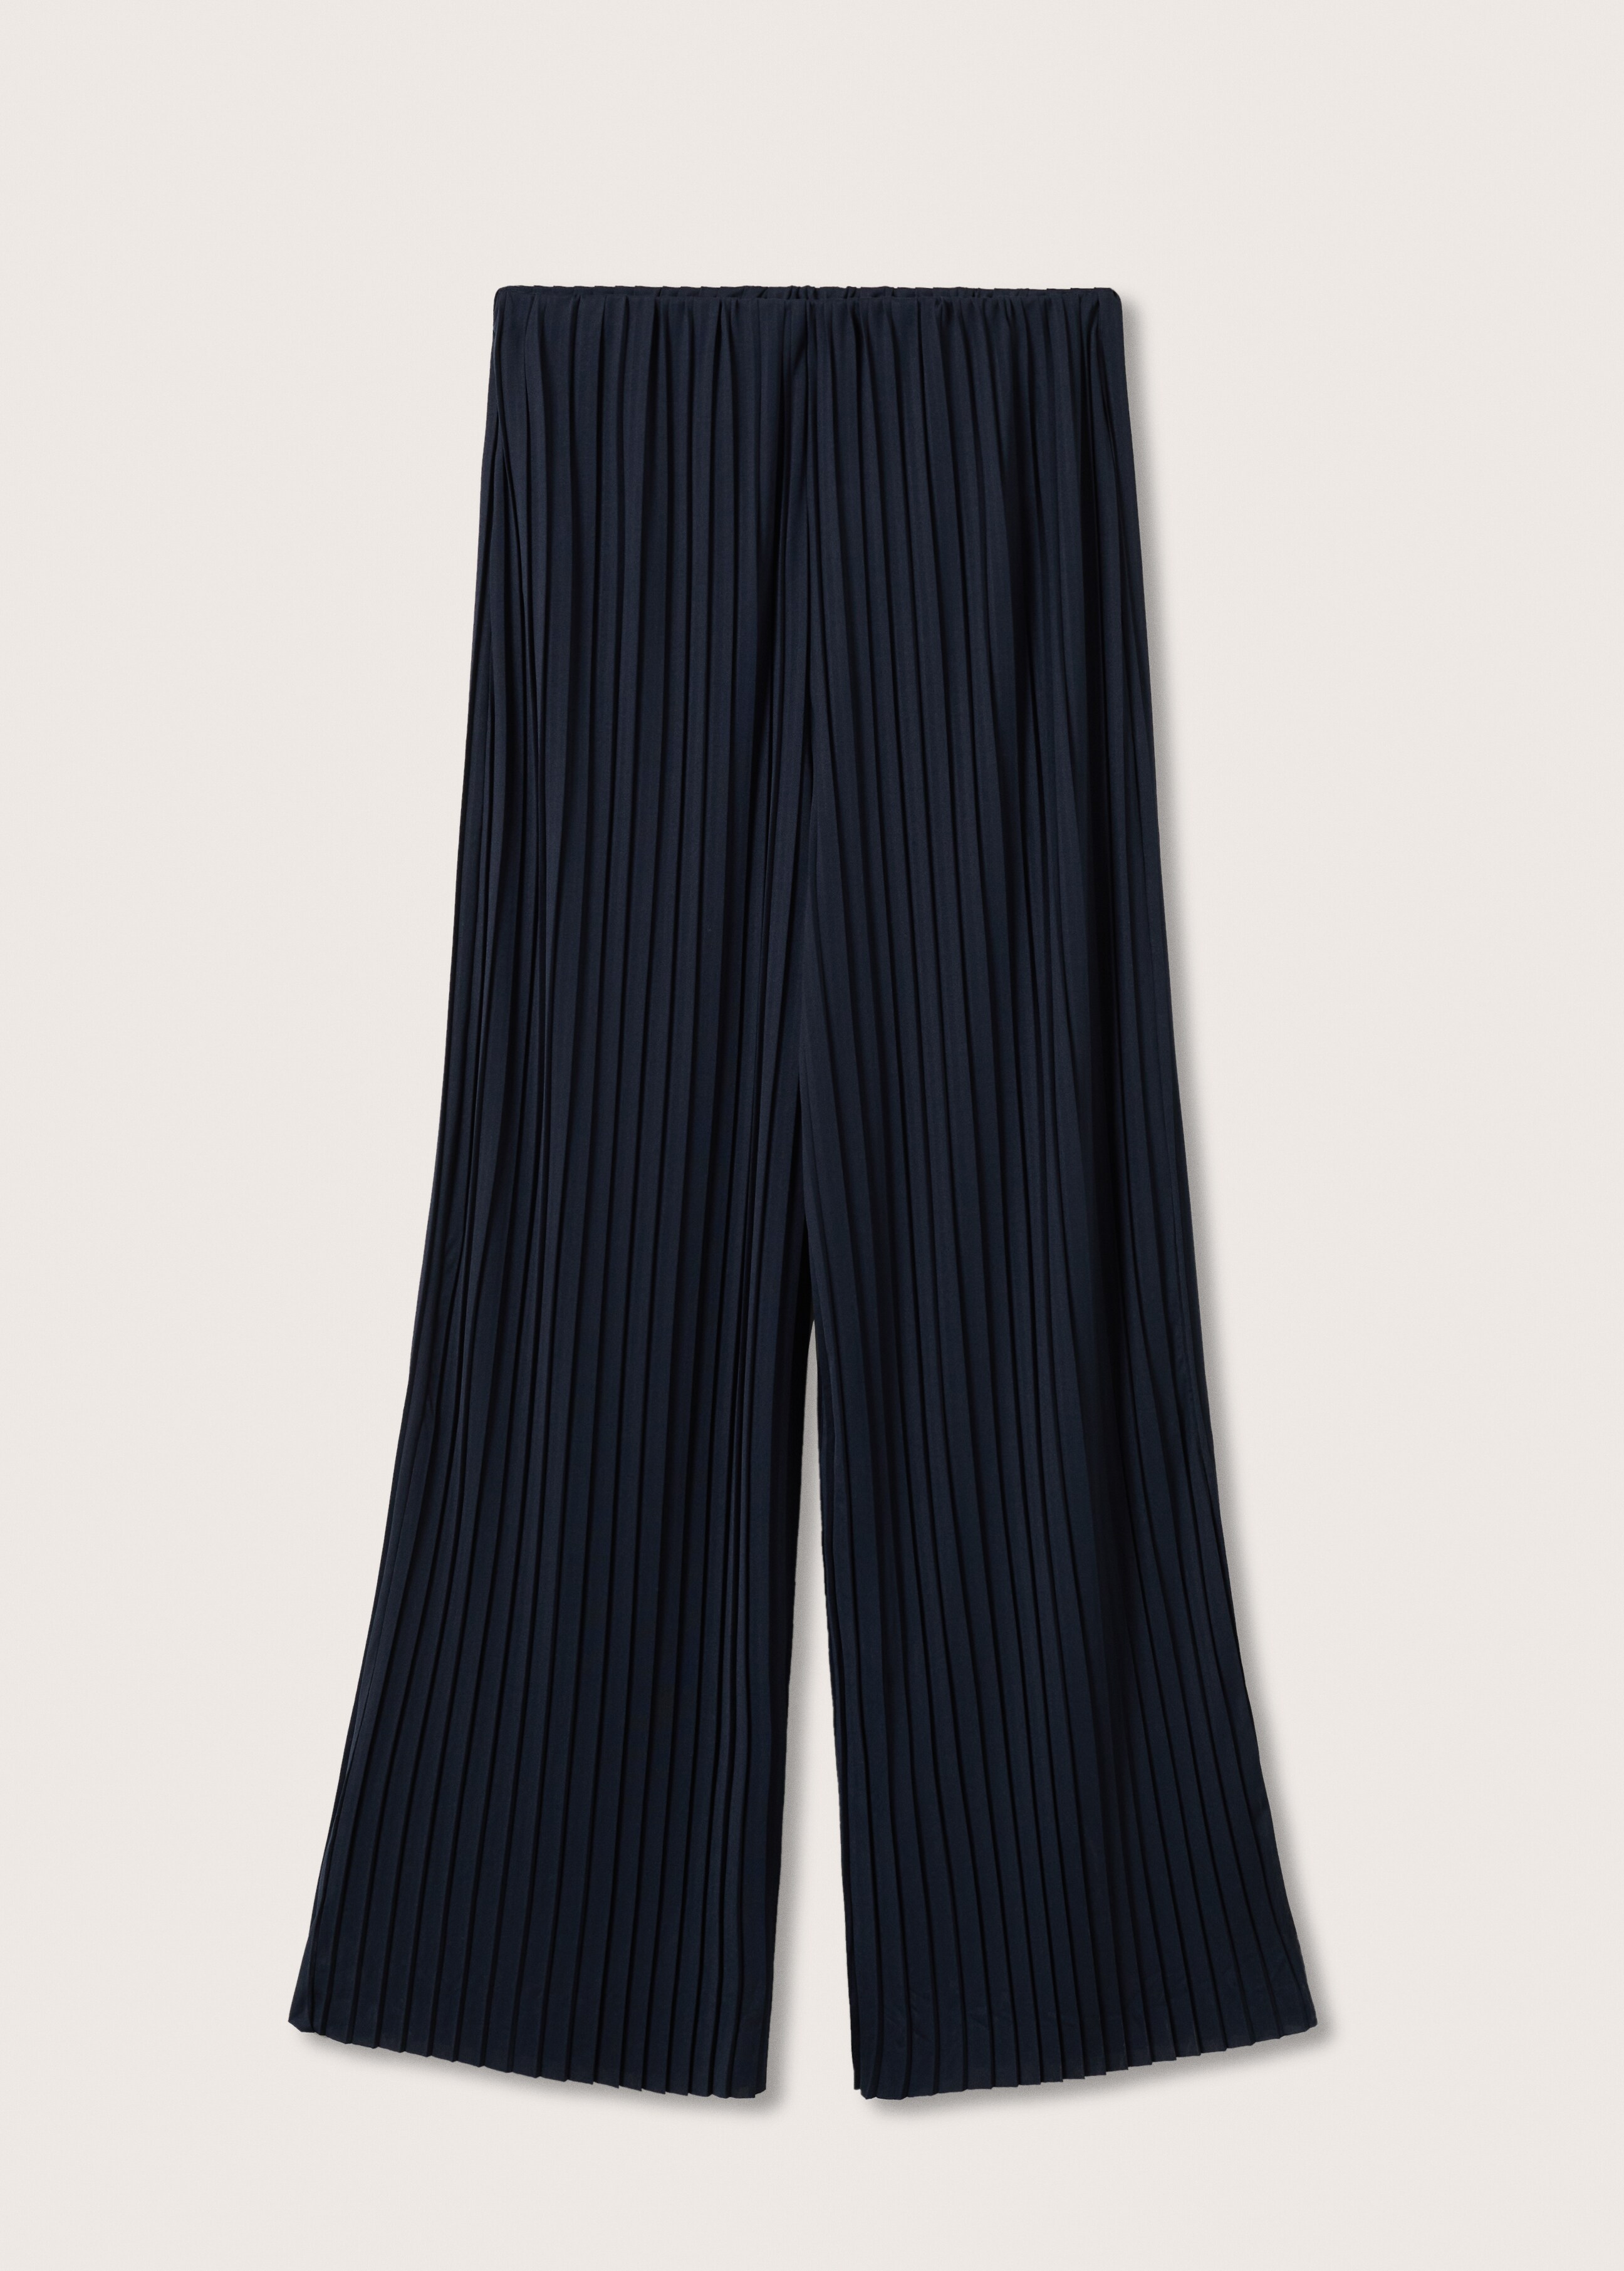 Pleated palazzo pants - Article without model